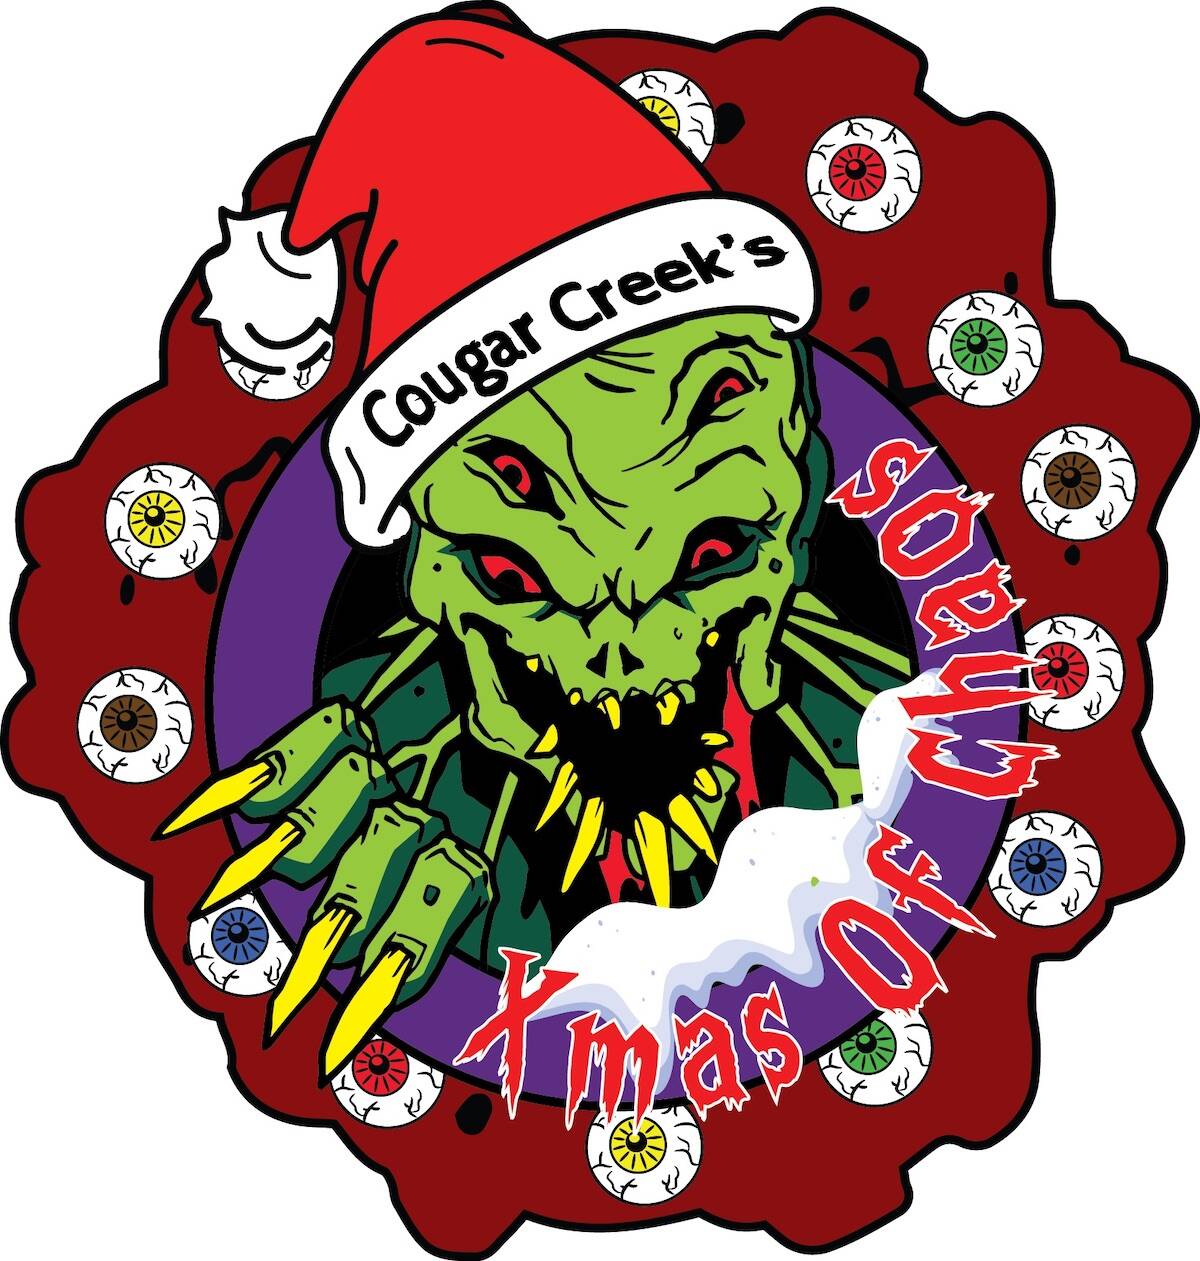 Canada’s FIRST Haunted CHRISTMAS House Is Happening Here In Surrey – ‘Cougar Creek’s Xmas Of Chaos’